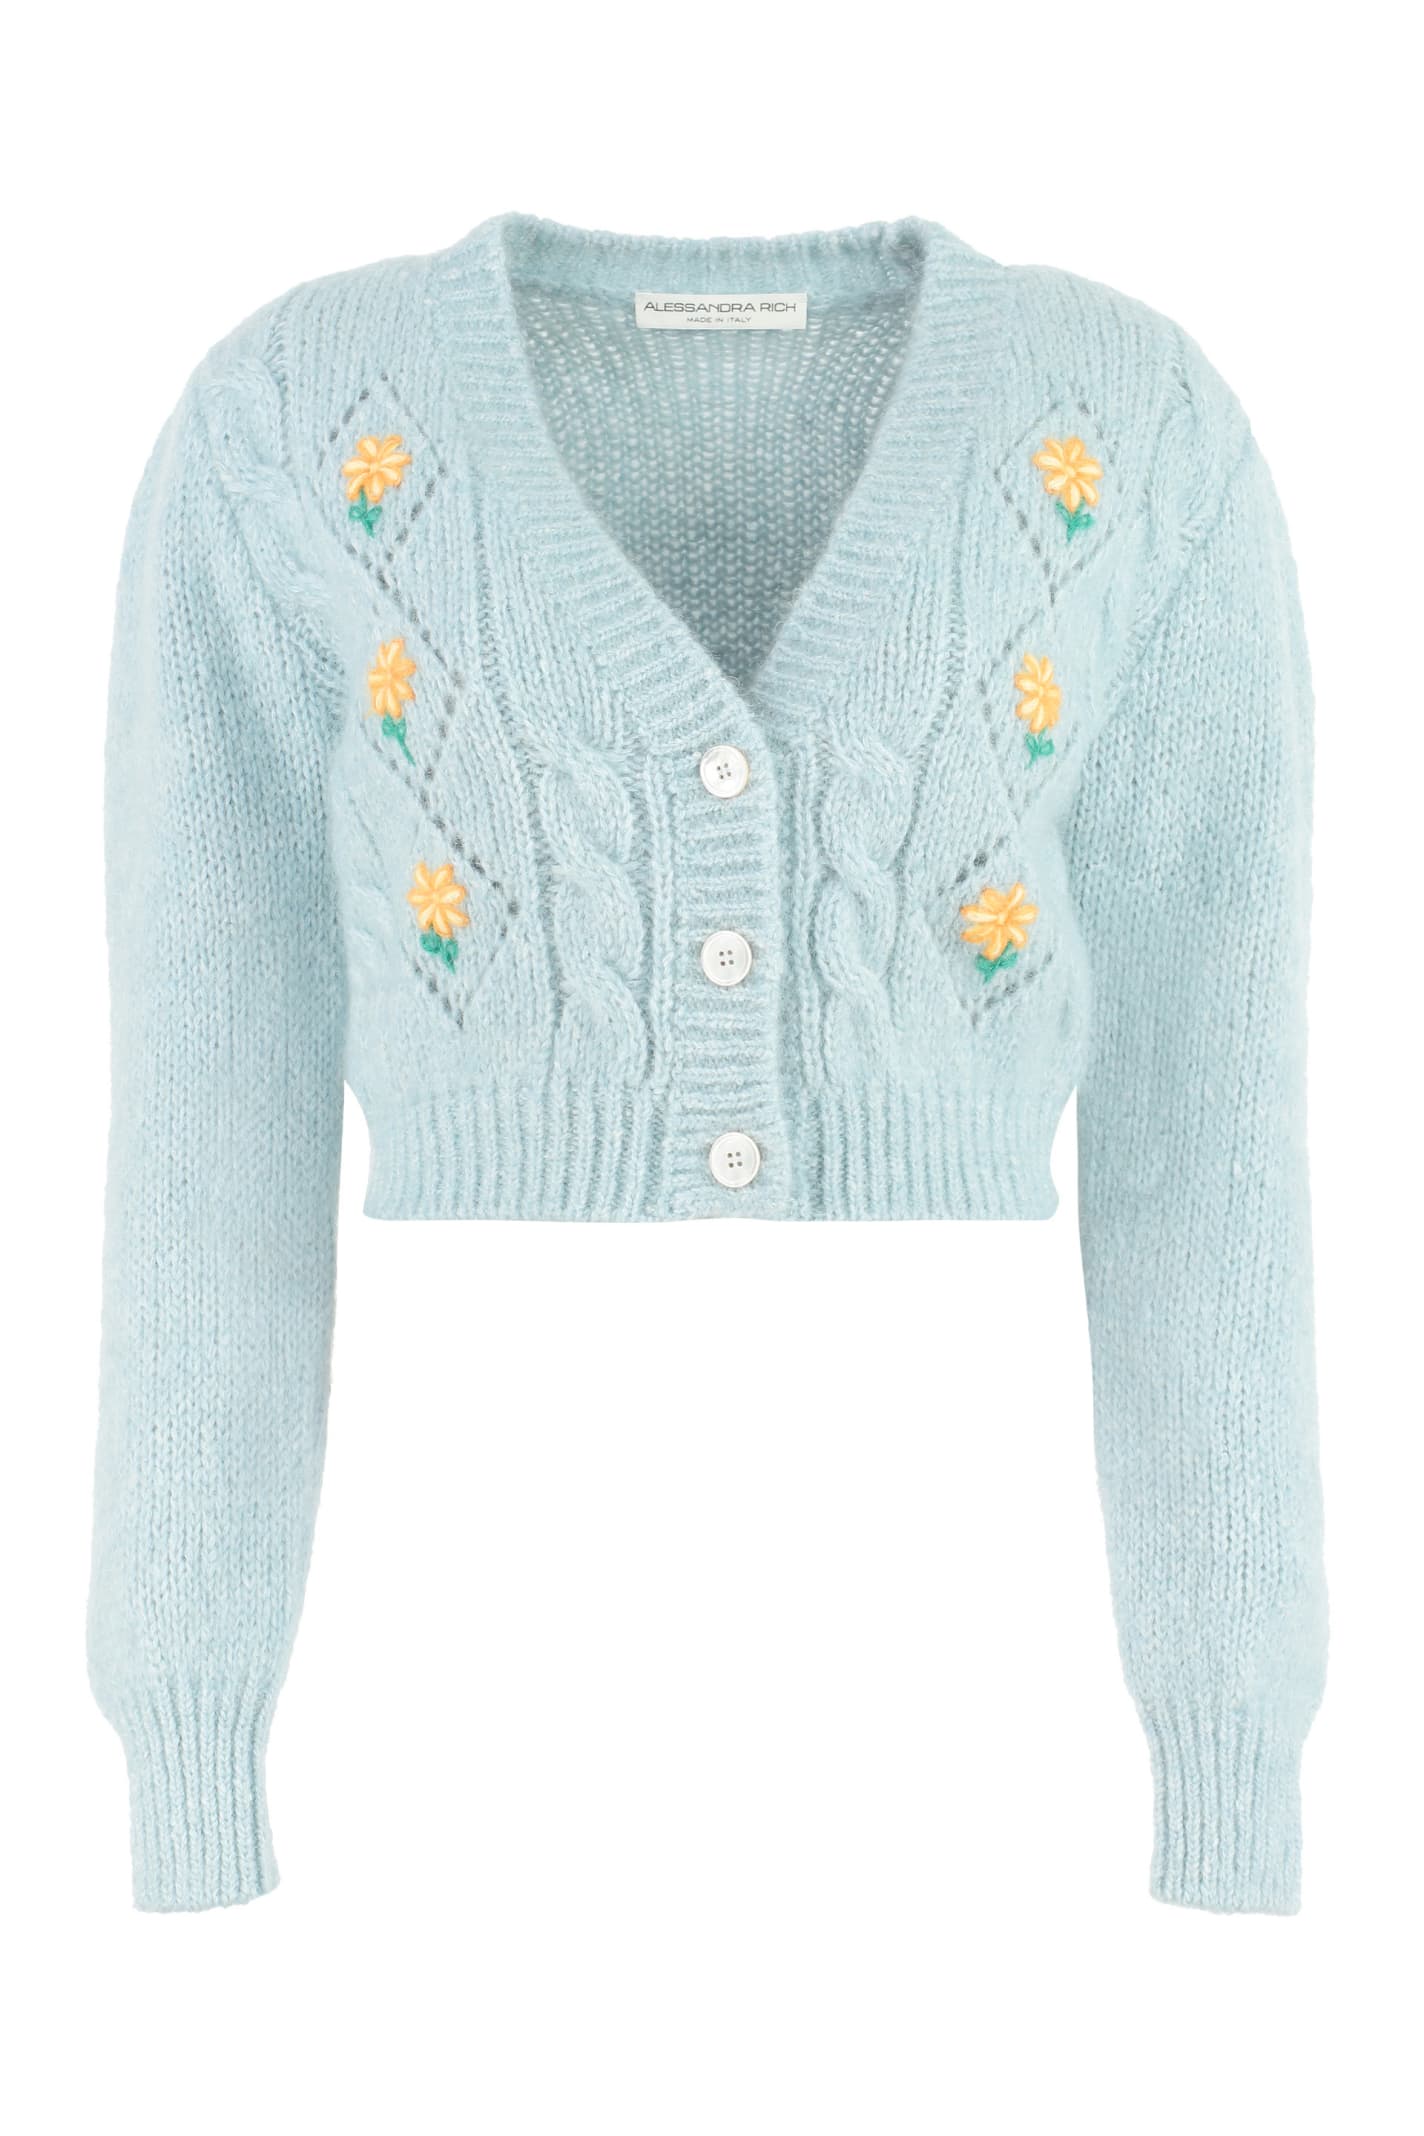 Alessandra Rich Cropped-length Knitted Cardigan